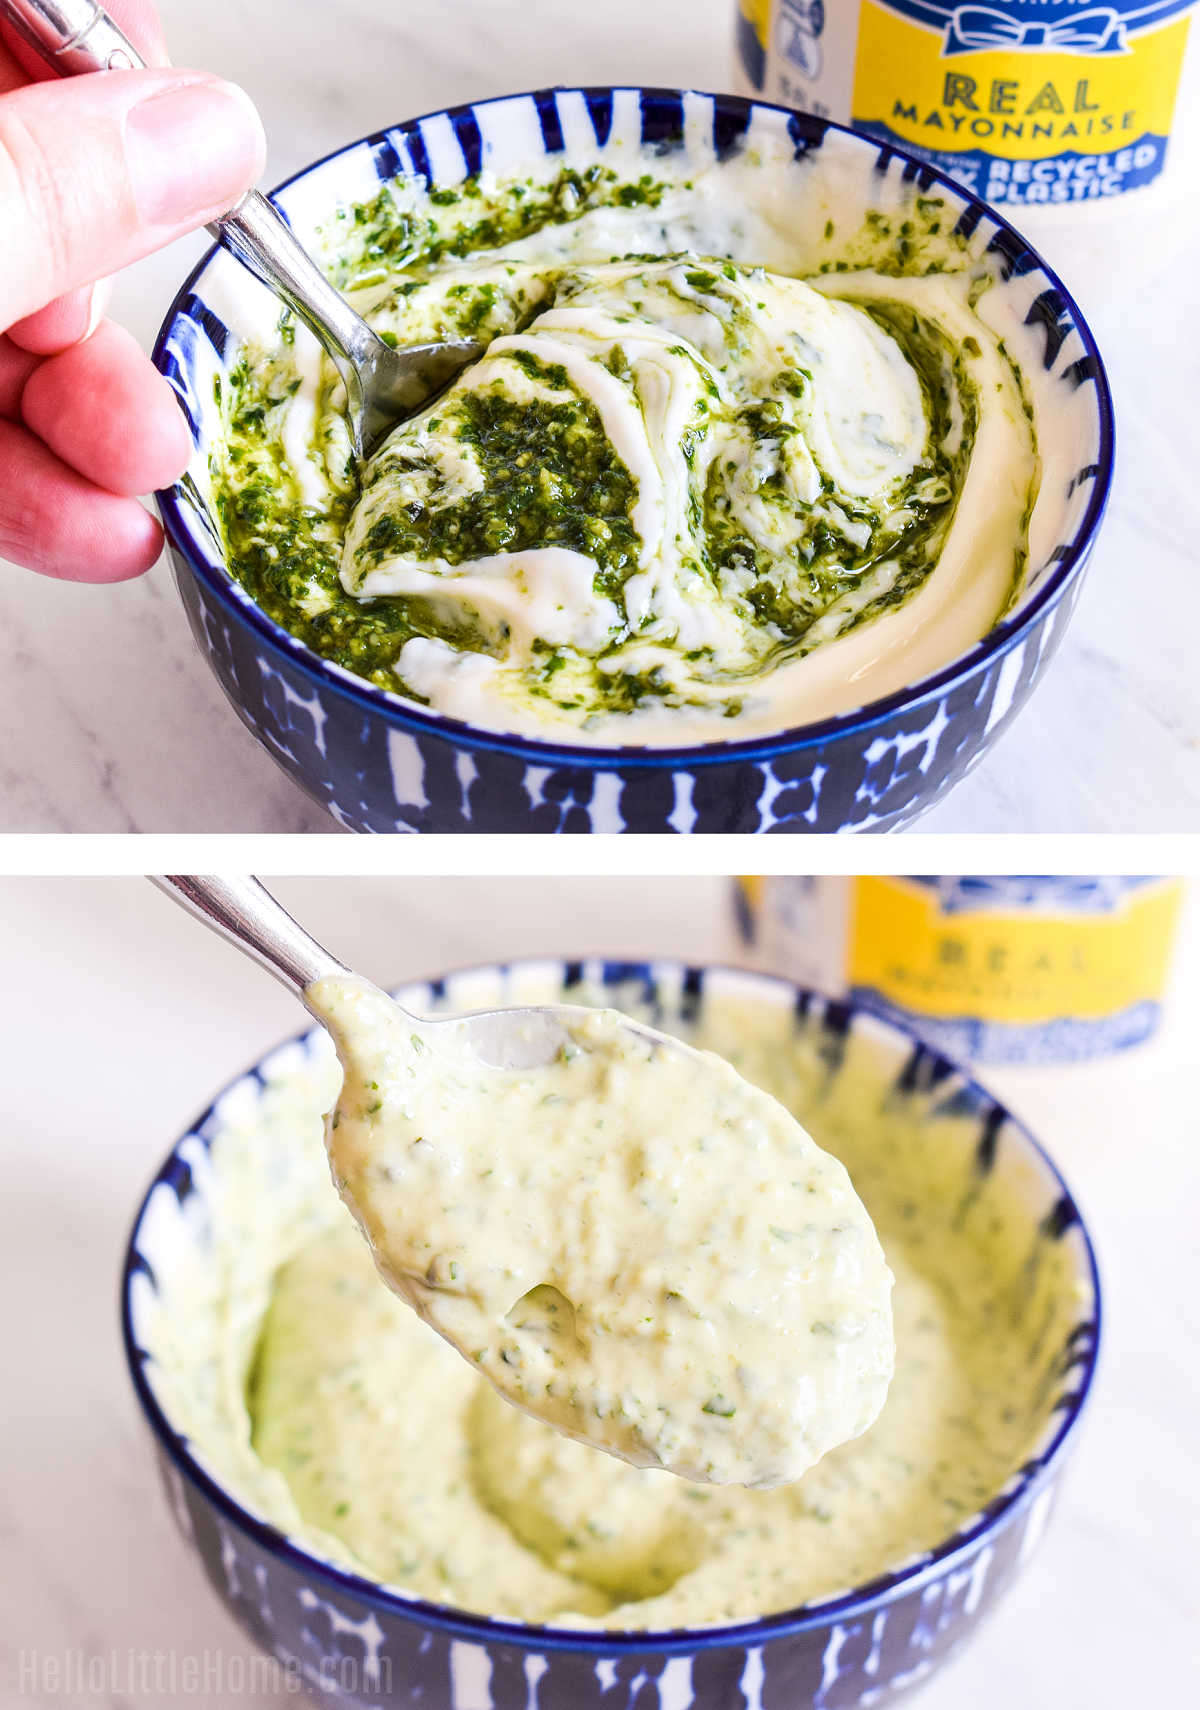 A photo collage showing how to make pesto mayo aioli.